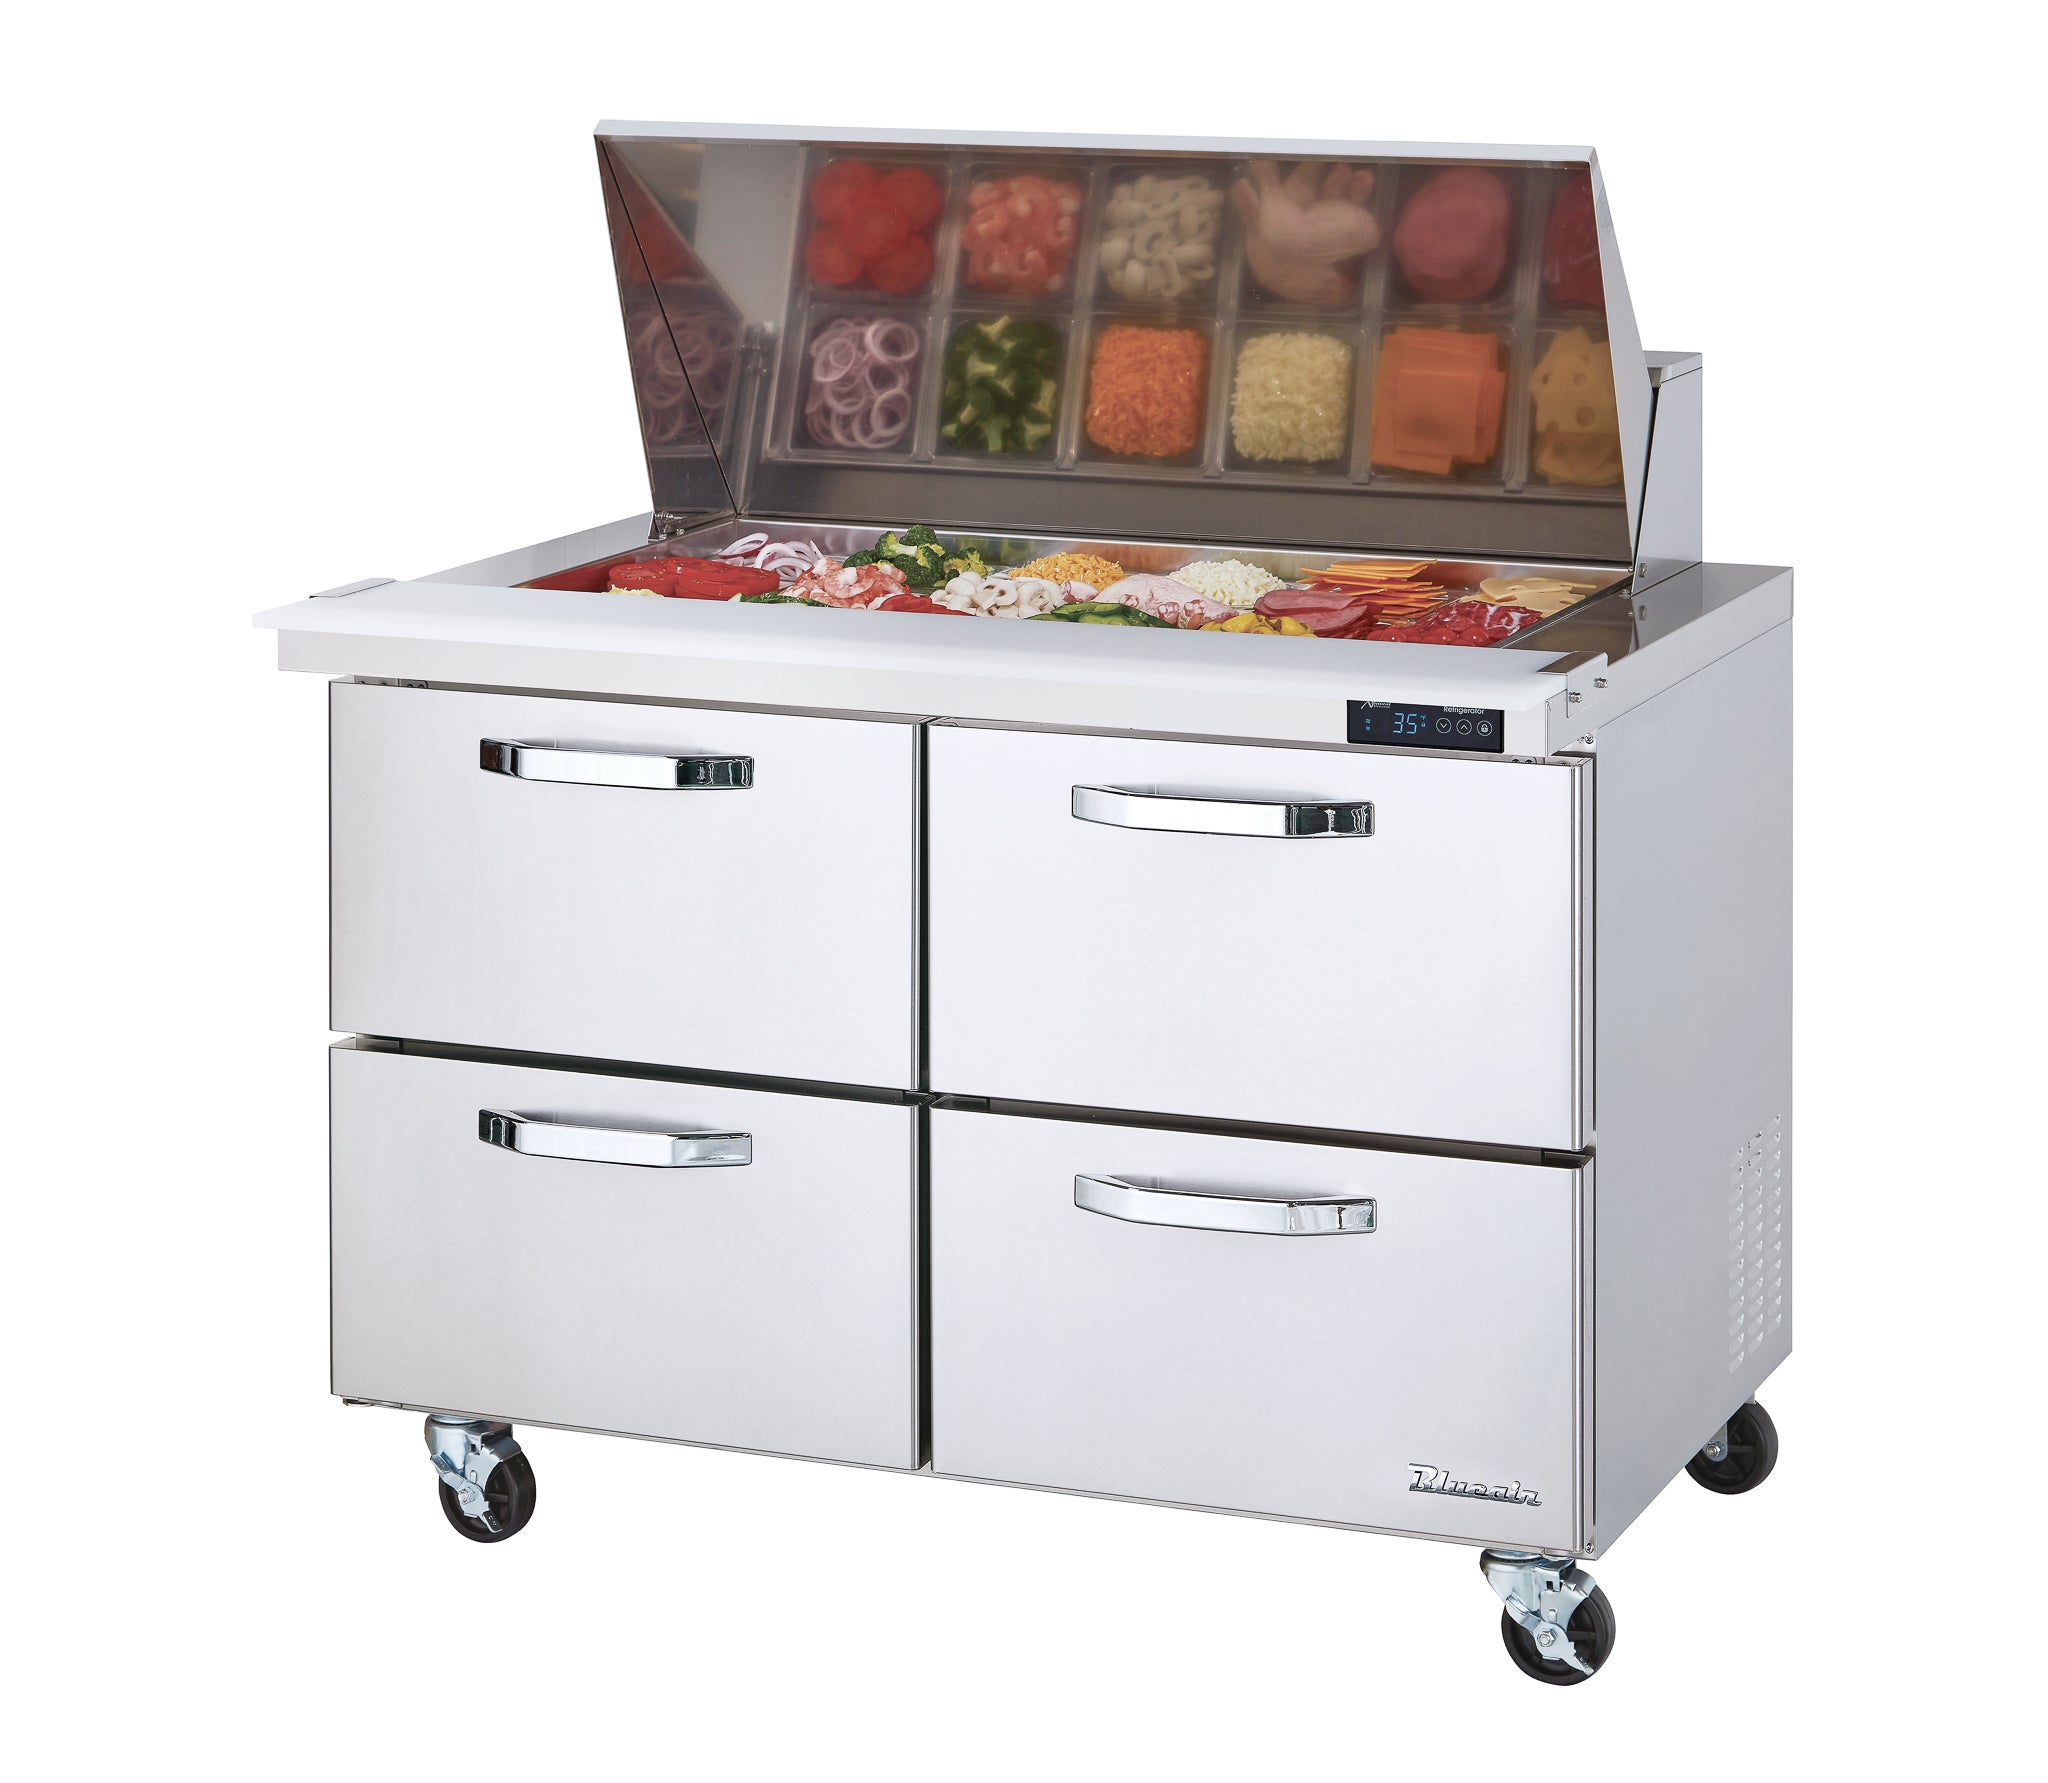 Blue Air - BLMT48-D4-HC, 4 Drawers All Stainless Prep. Table with (18) 1/6 Pans - 48" wide, 13 cu/ft., R-290 Refrigerant